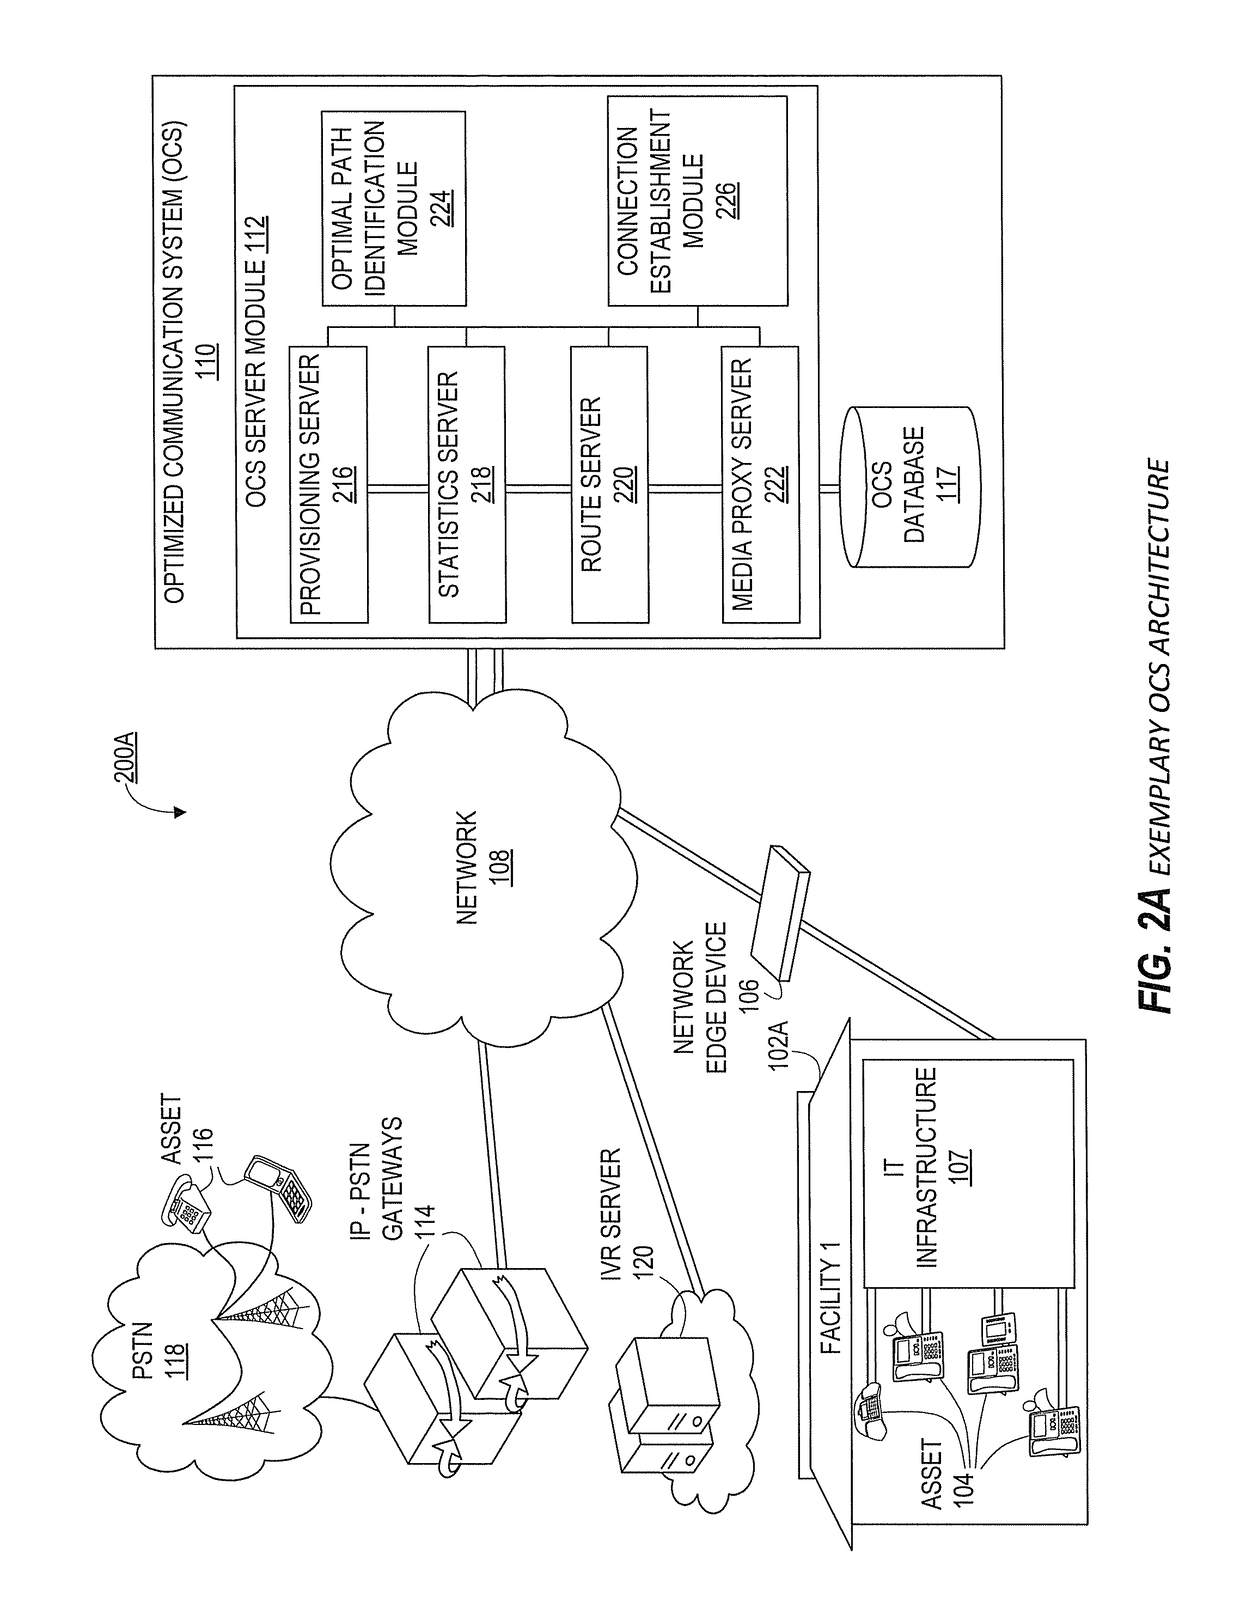 Systems and methods for optimizing application data delivery over third party networks